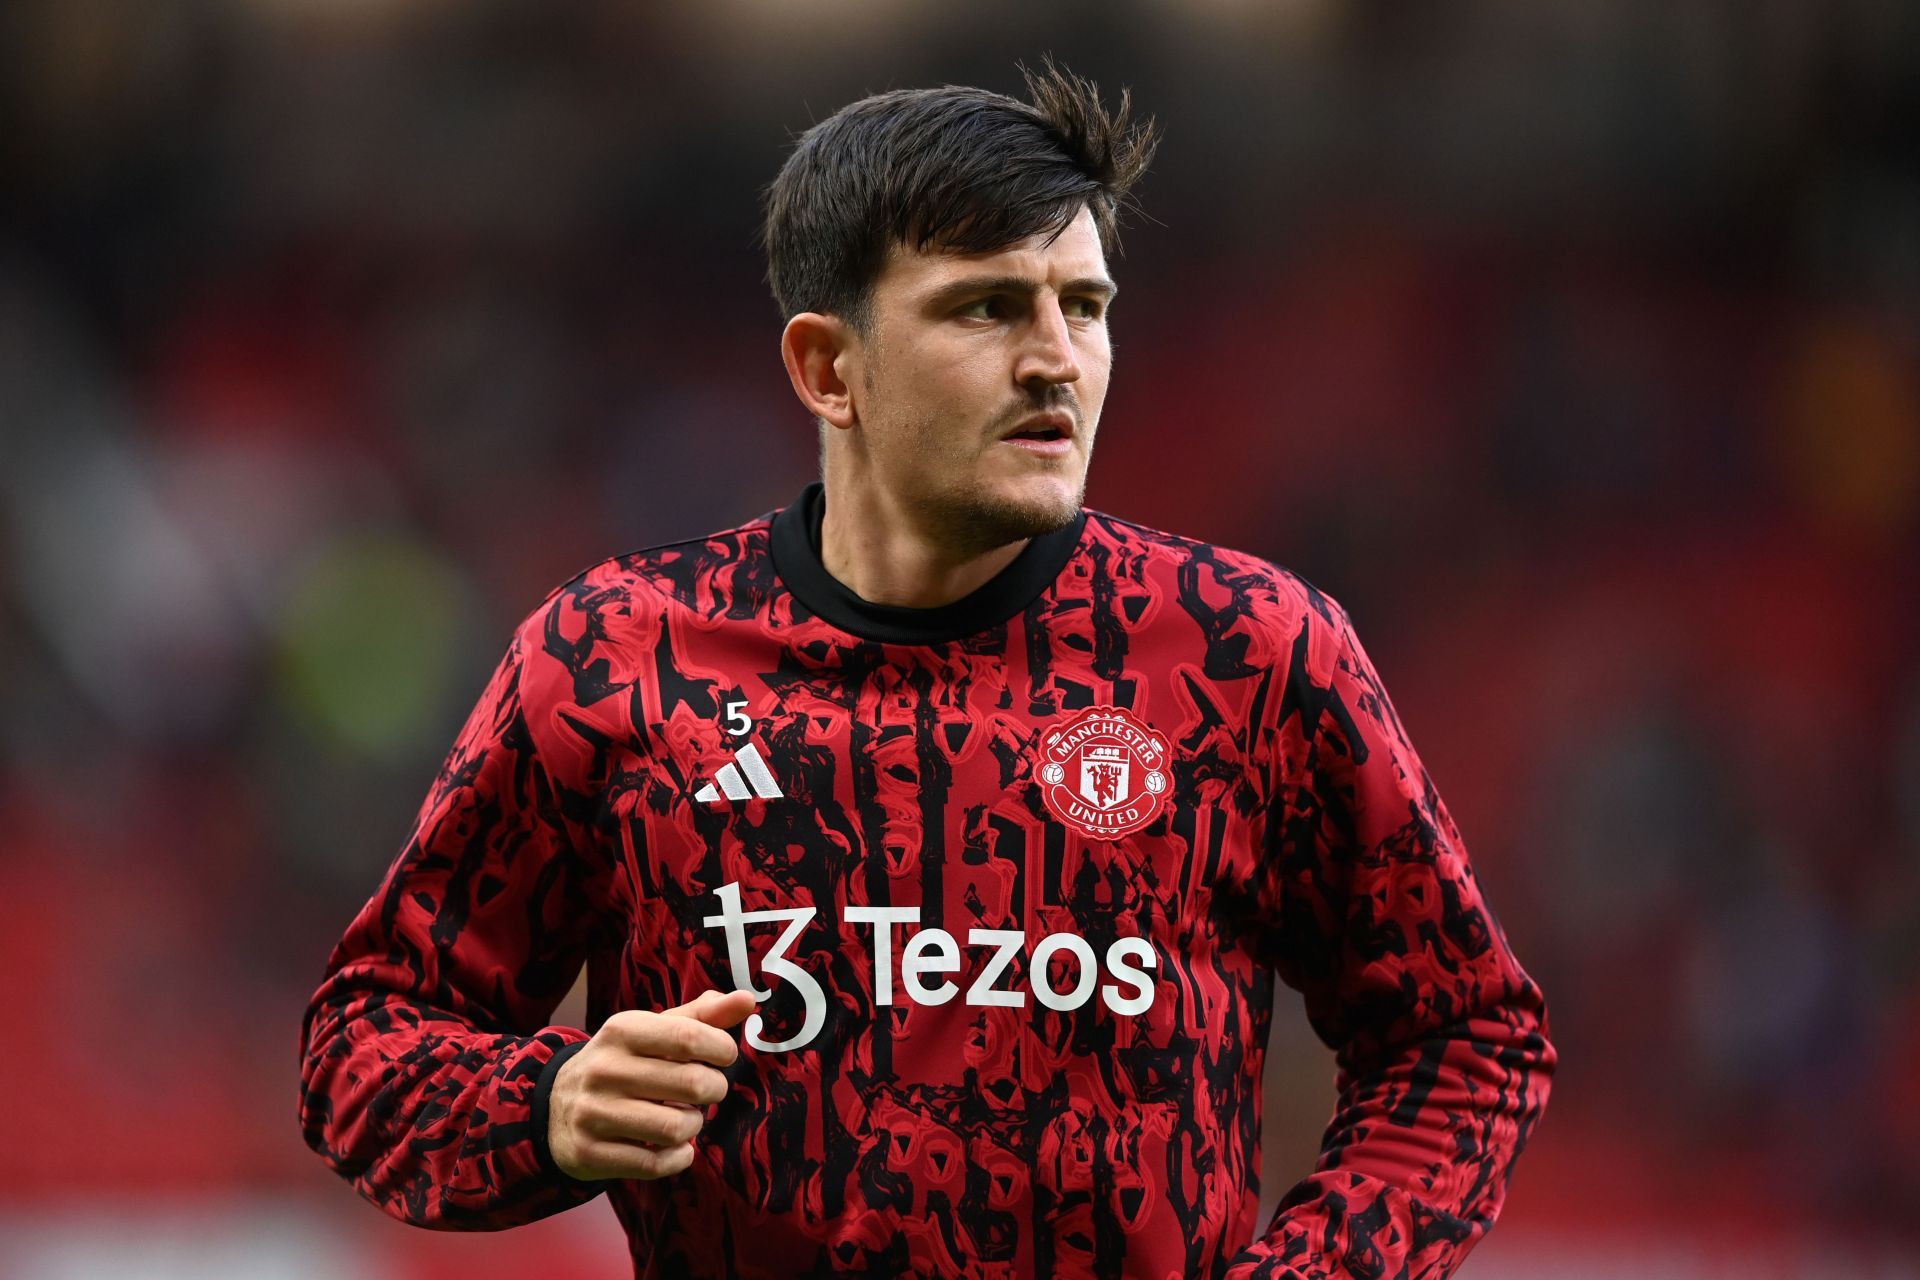 Harry Maguire has received abuse throughout his spell at Manchester United.